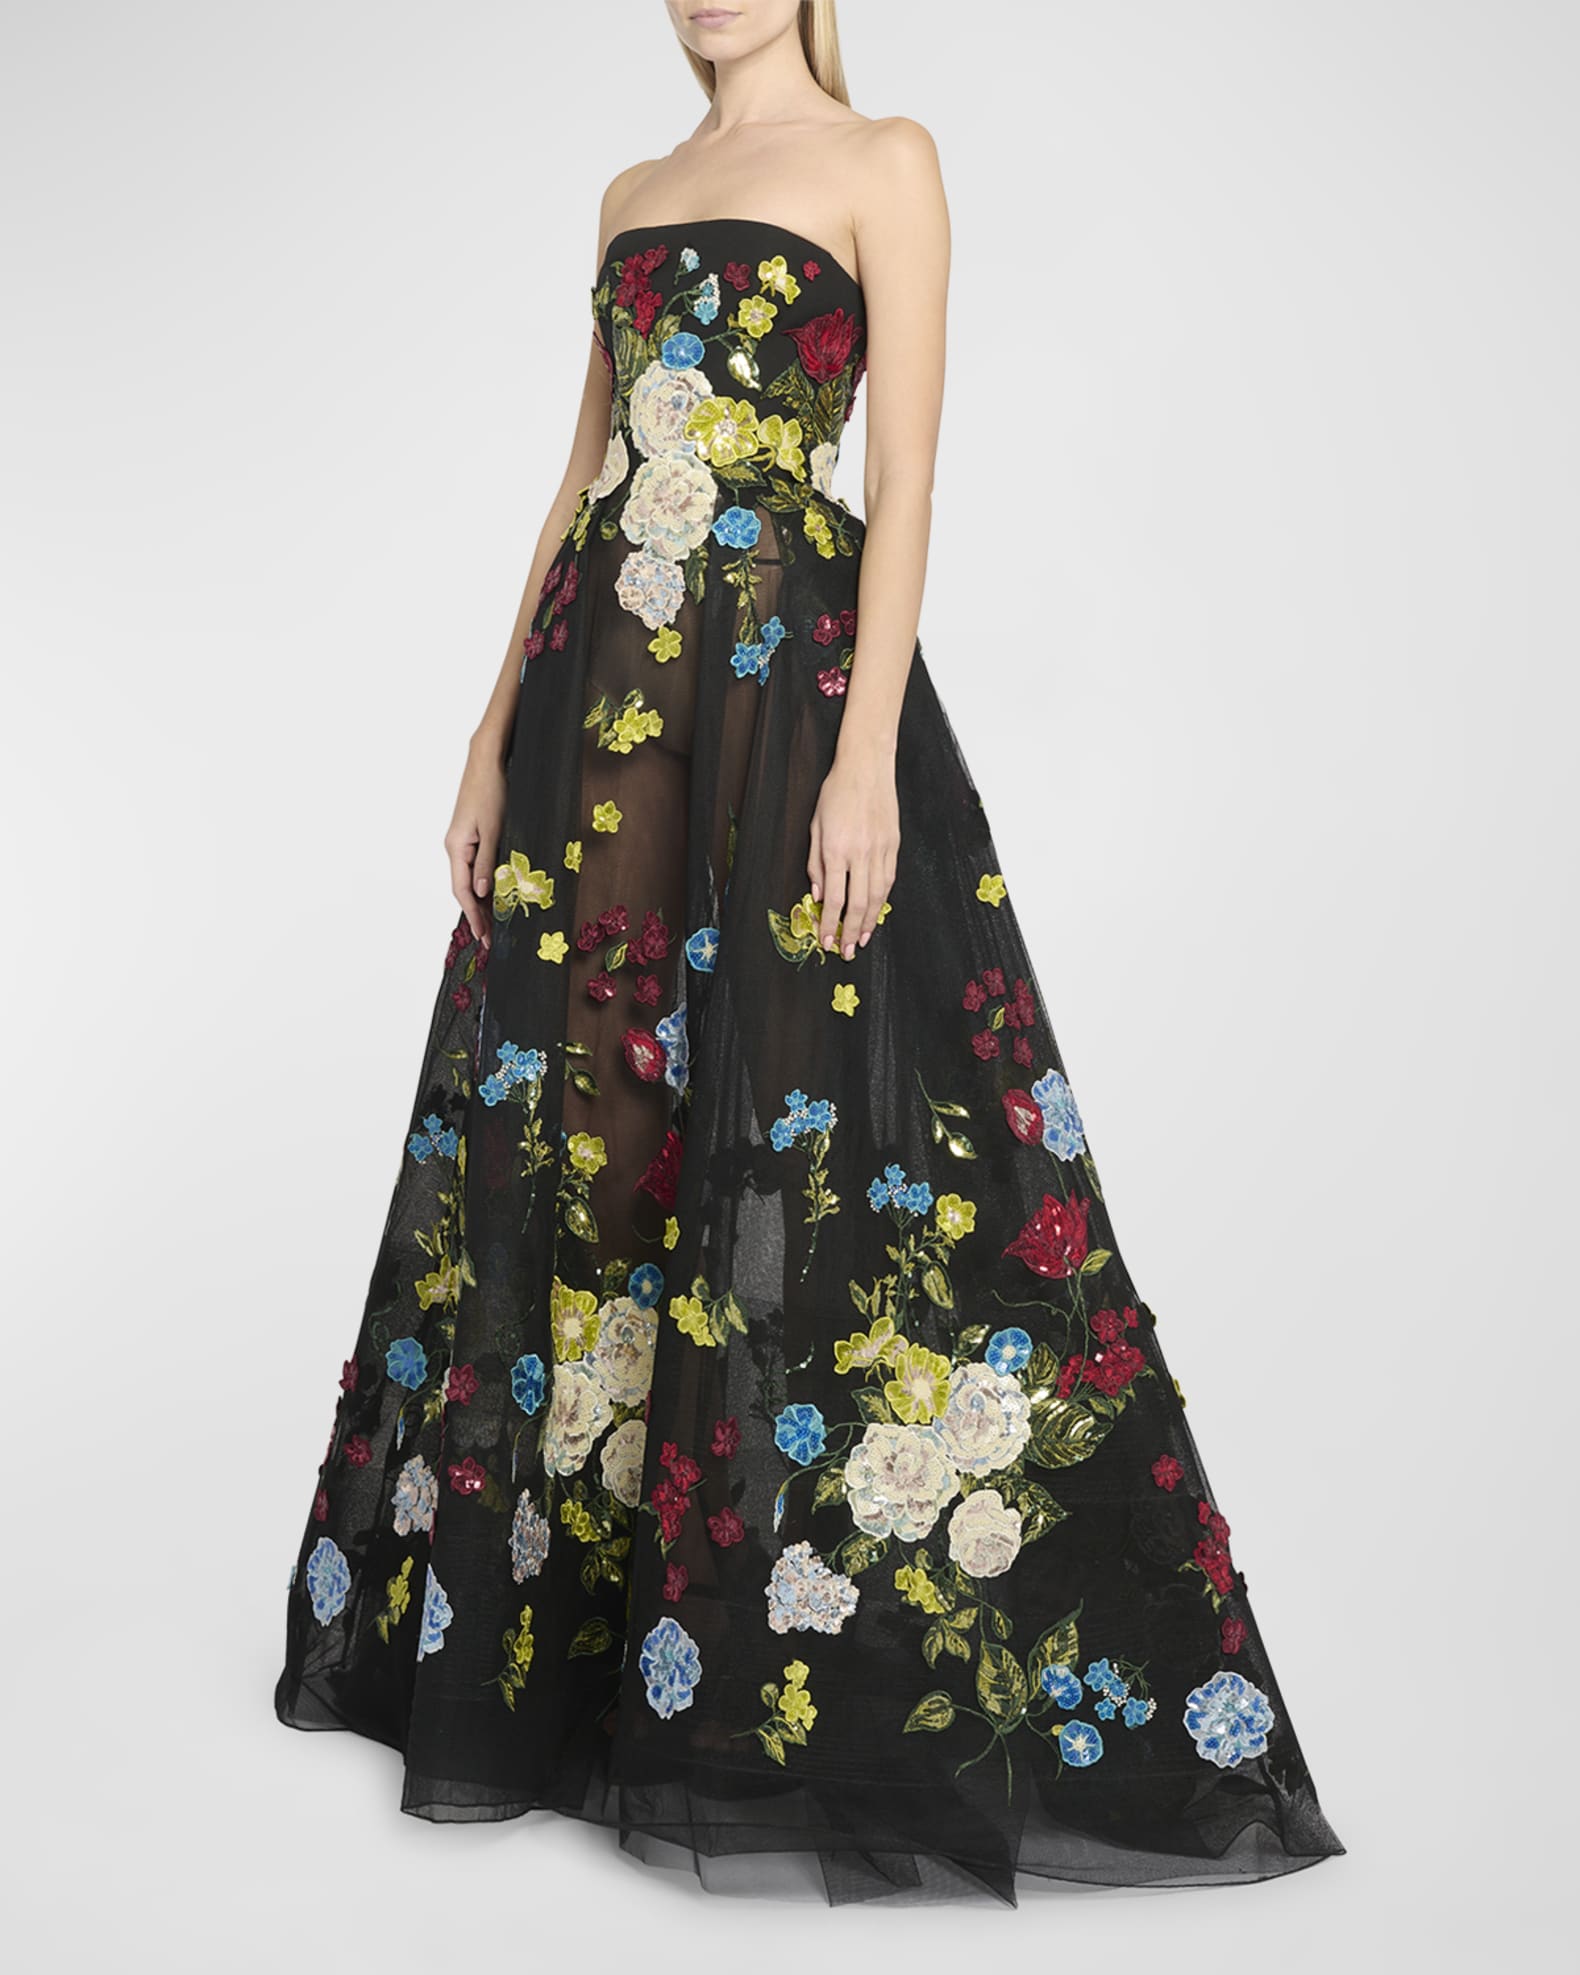 GIORGIO ARMANI Floral Print Silk Strapless Evening Gown at 1stDibs